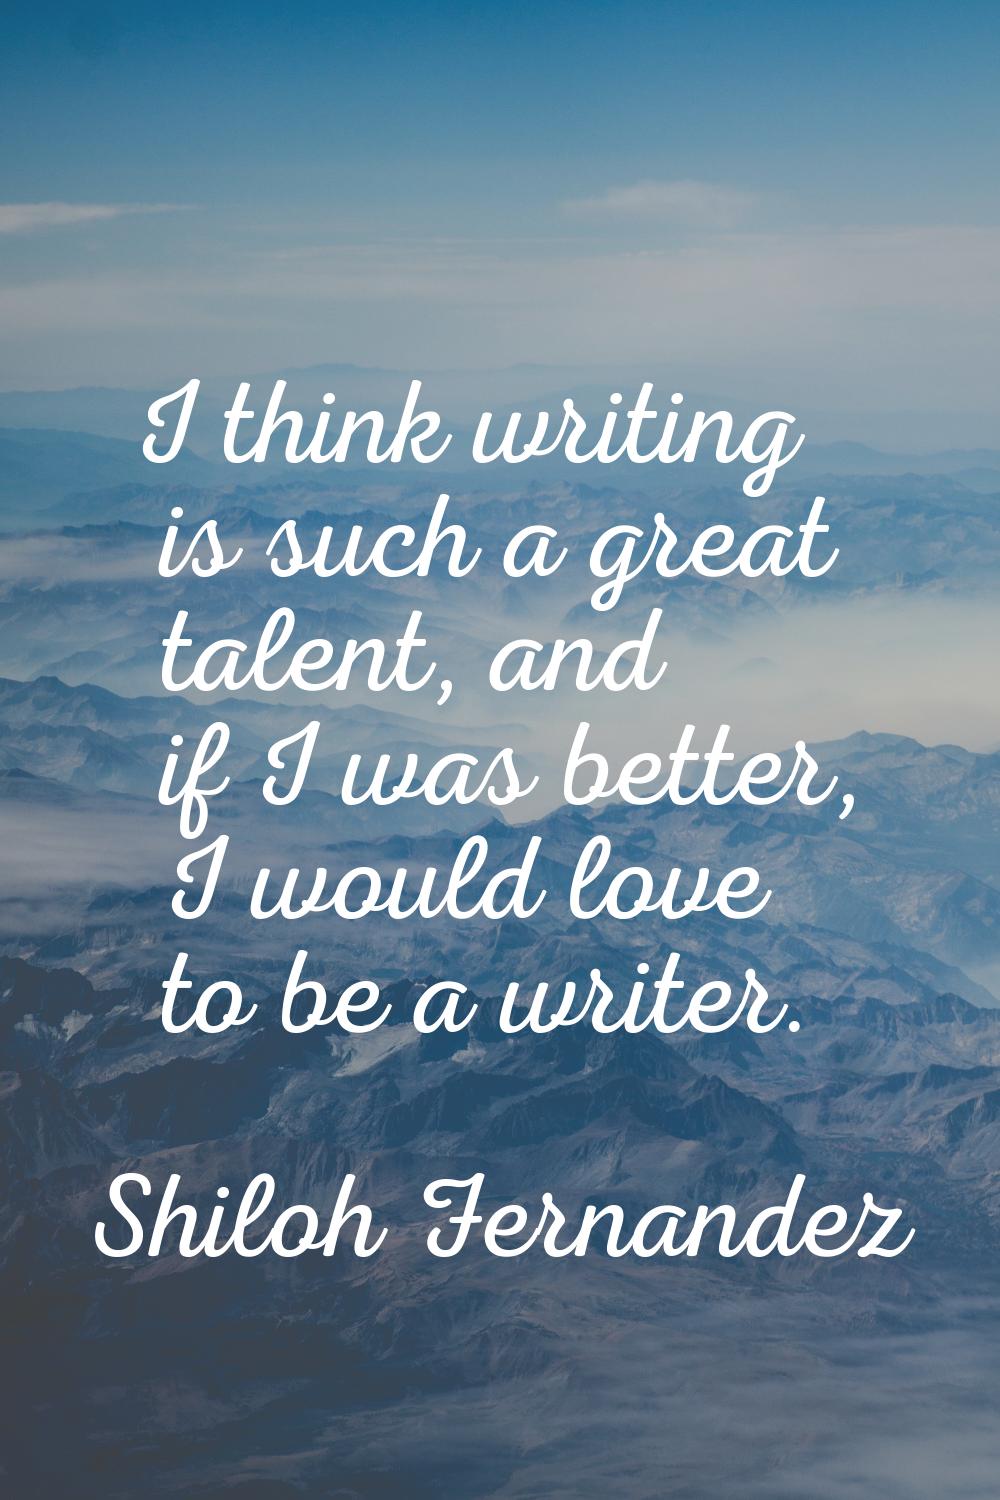 I think writing is such a great talent, and if I was better, I would love to be a writer.